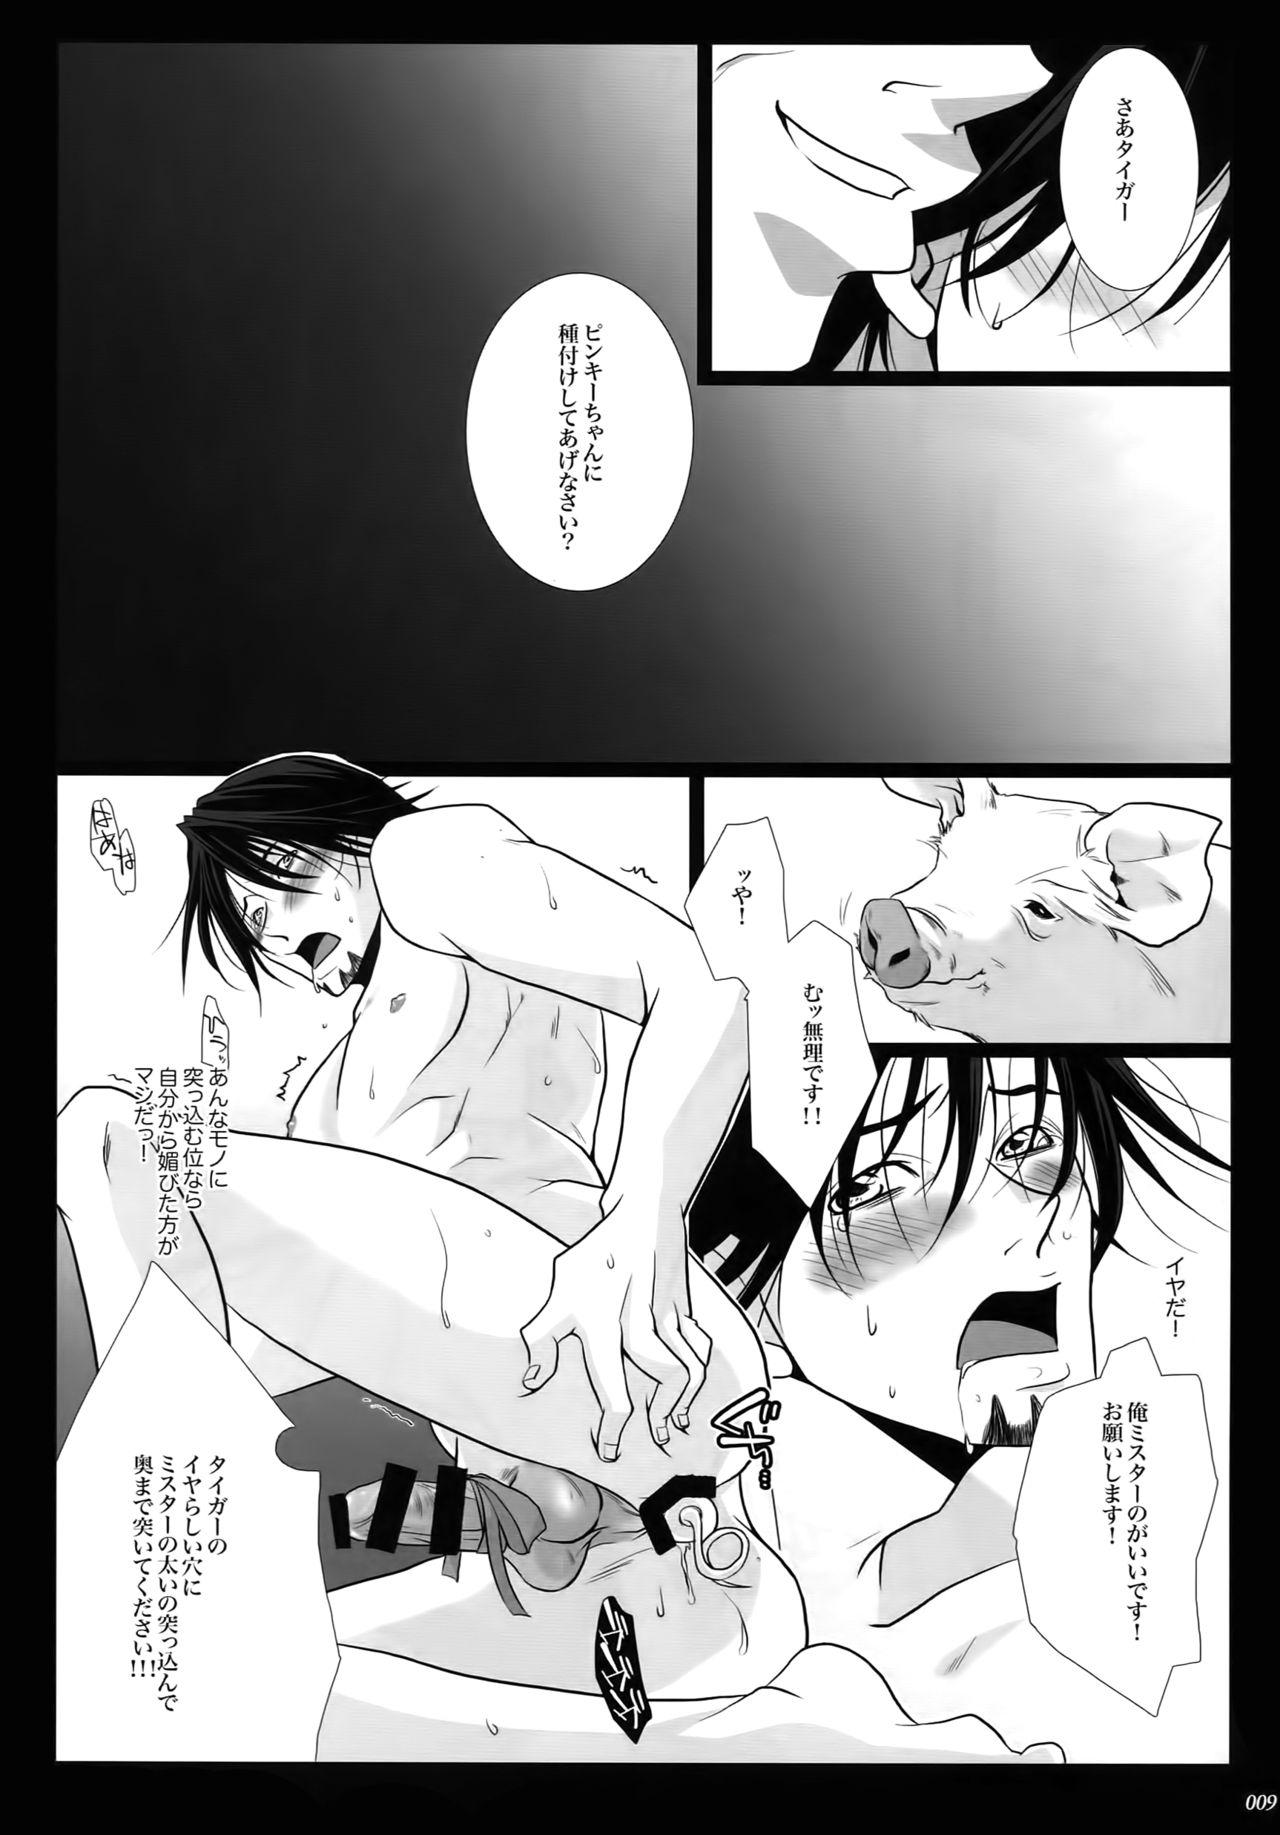 Teens mob;Re - Tiger and bunny Scene - Page 8